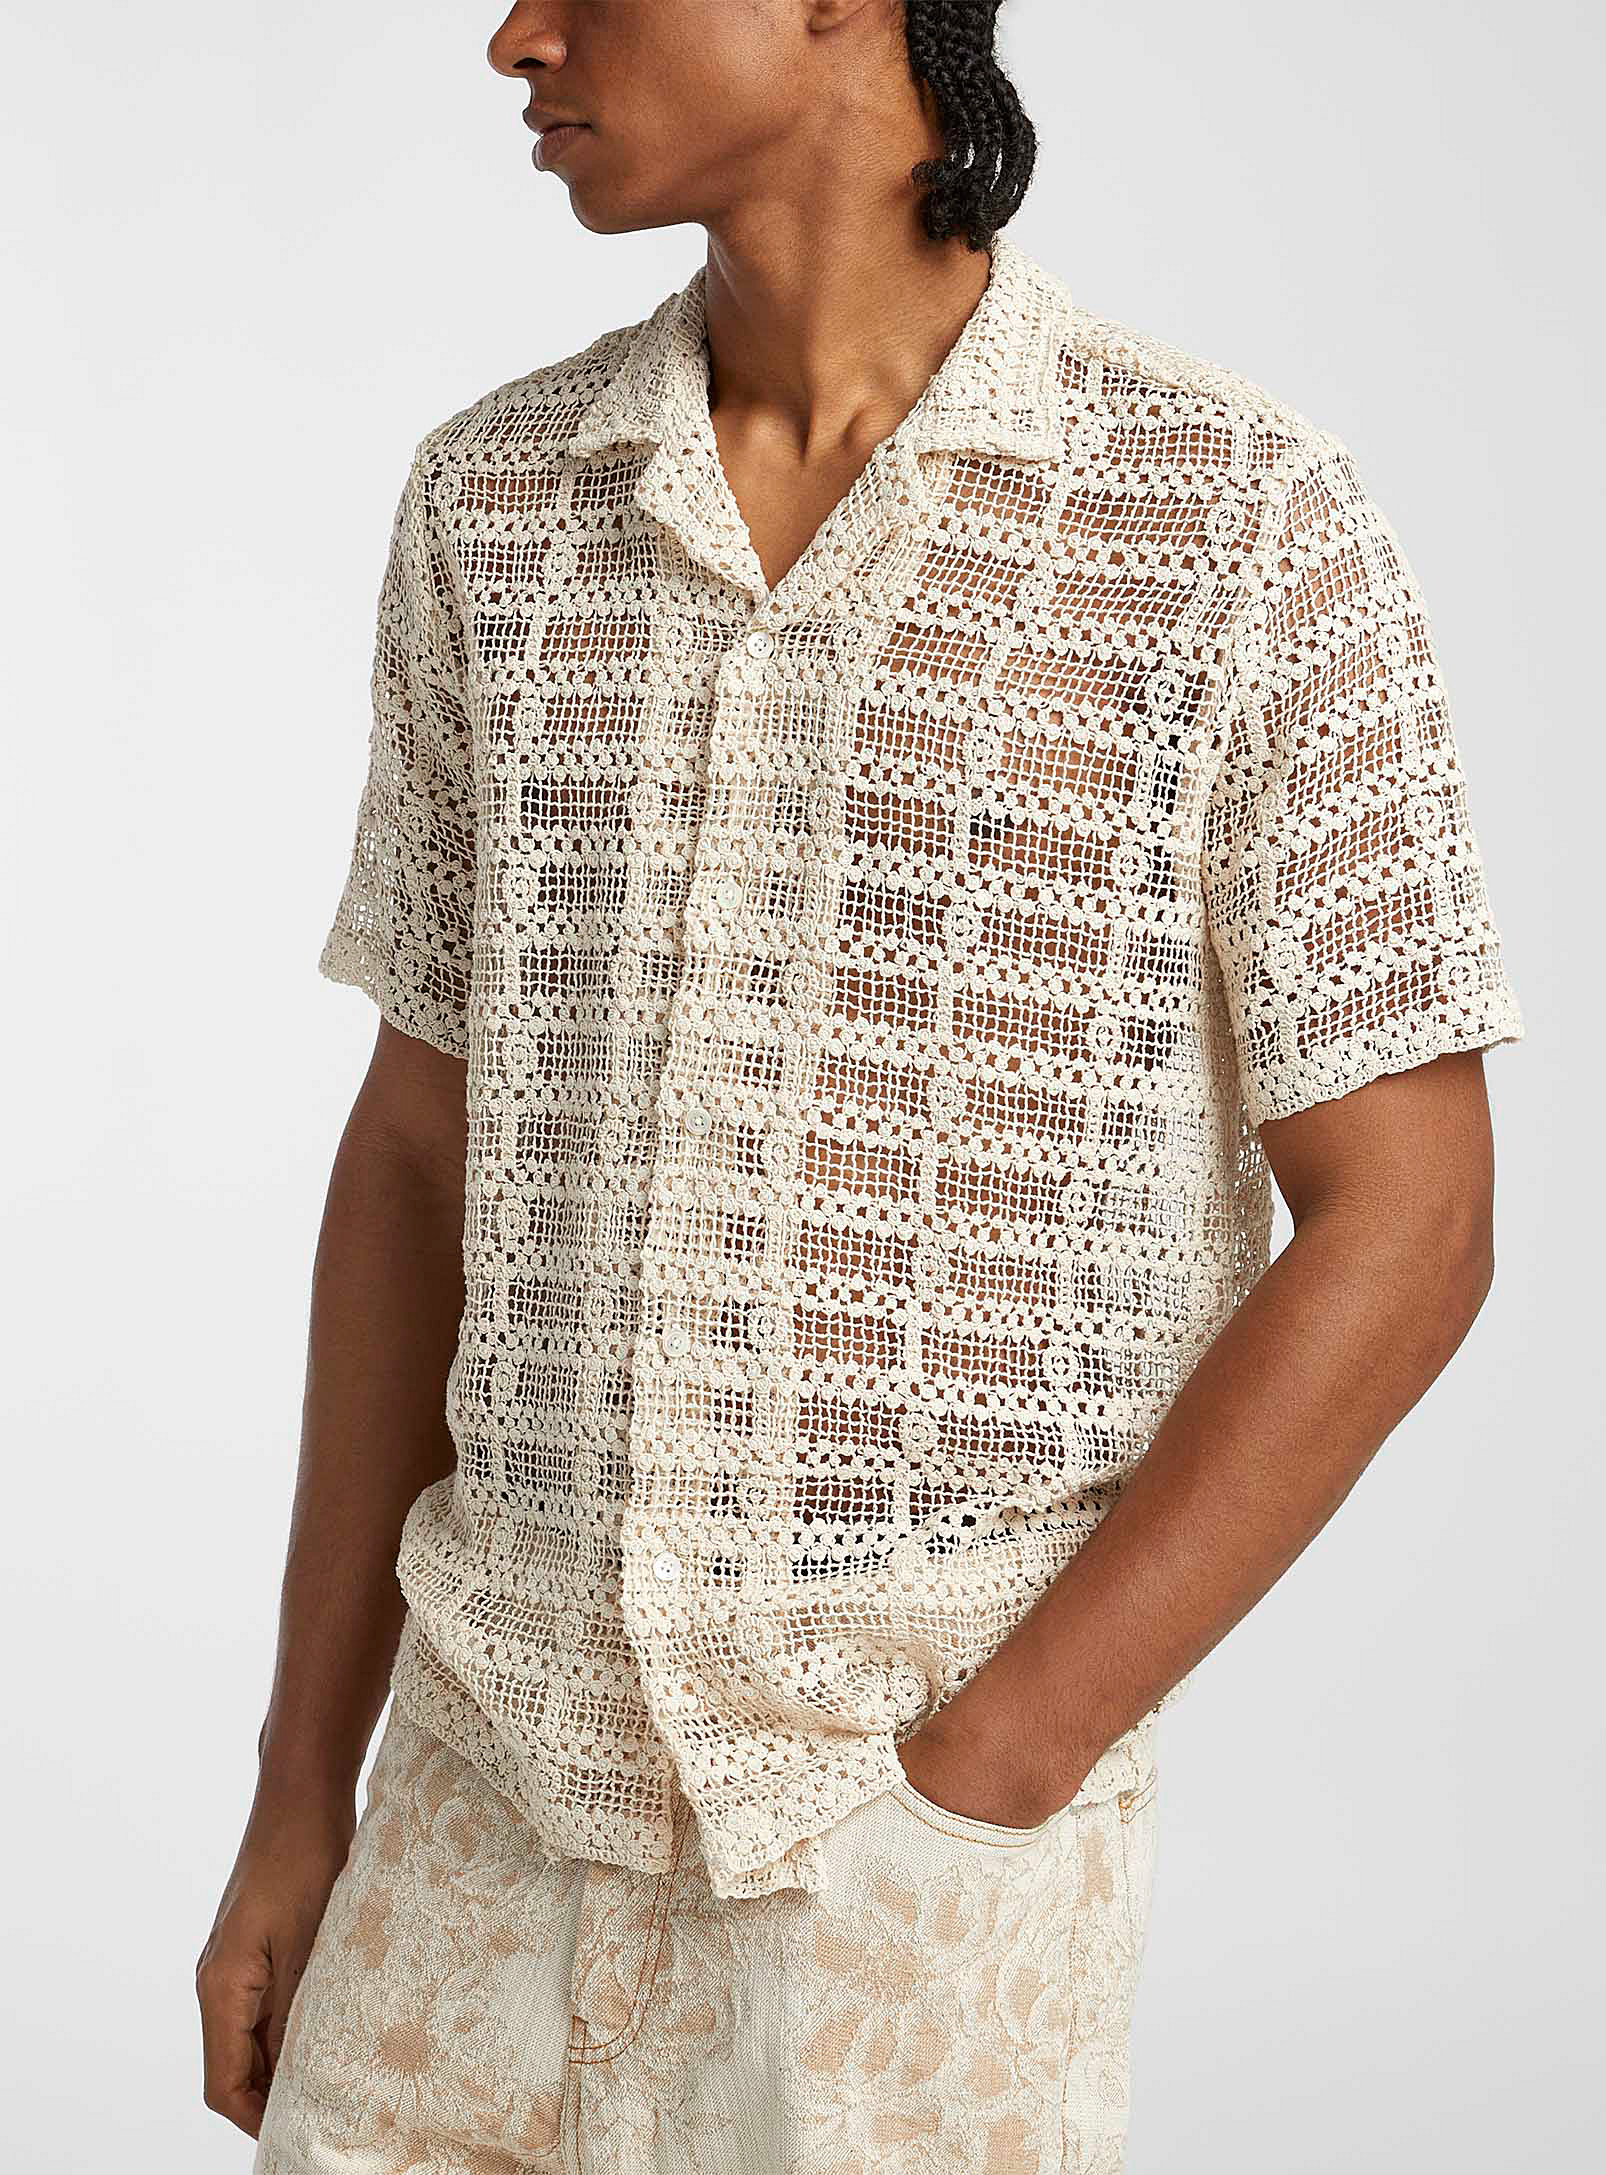 Cmmn Swdn - Men's Embroidered lace shirt